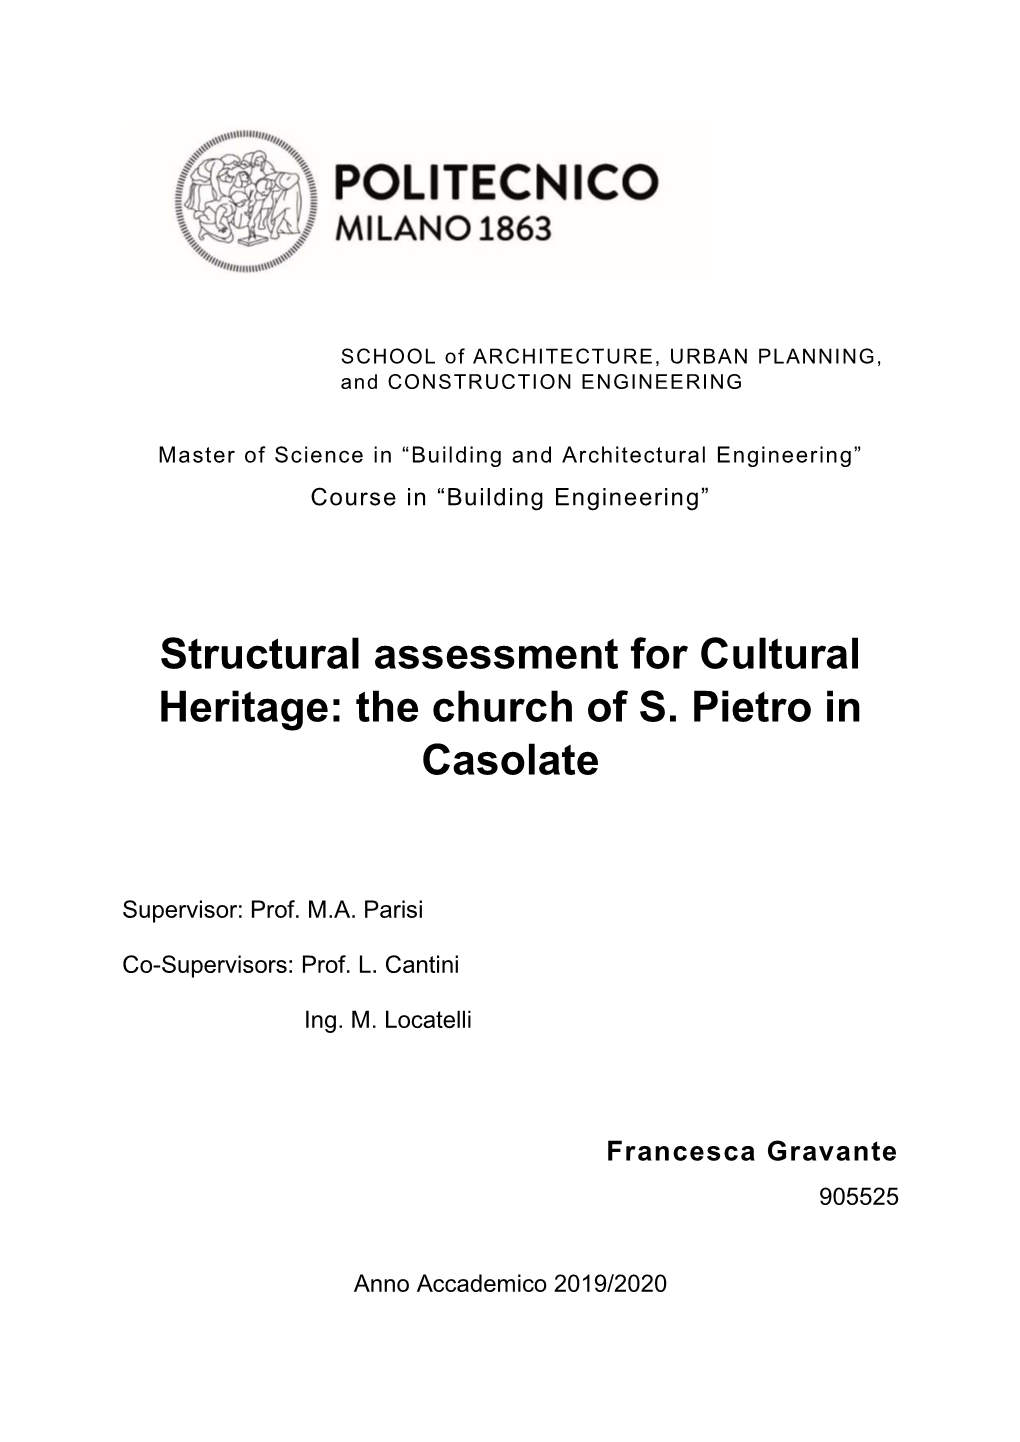 Structural Assessment for Cultural Heritage: the Church of S